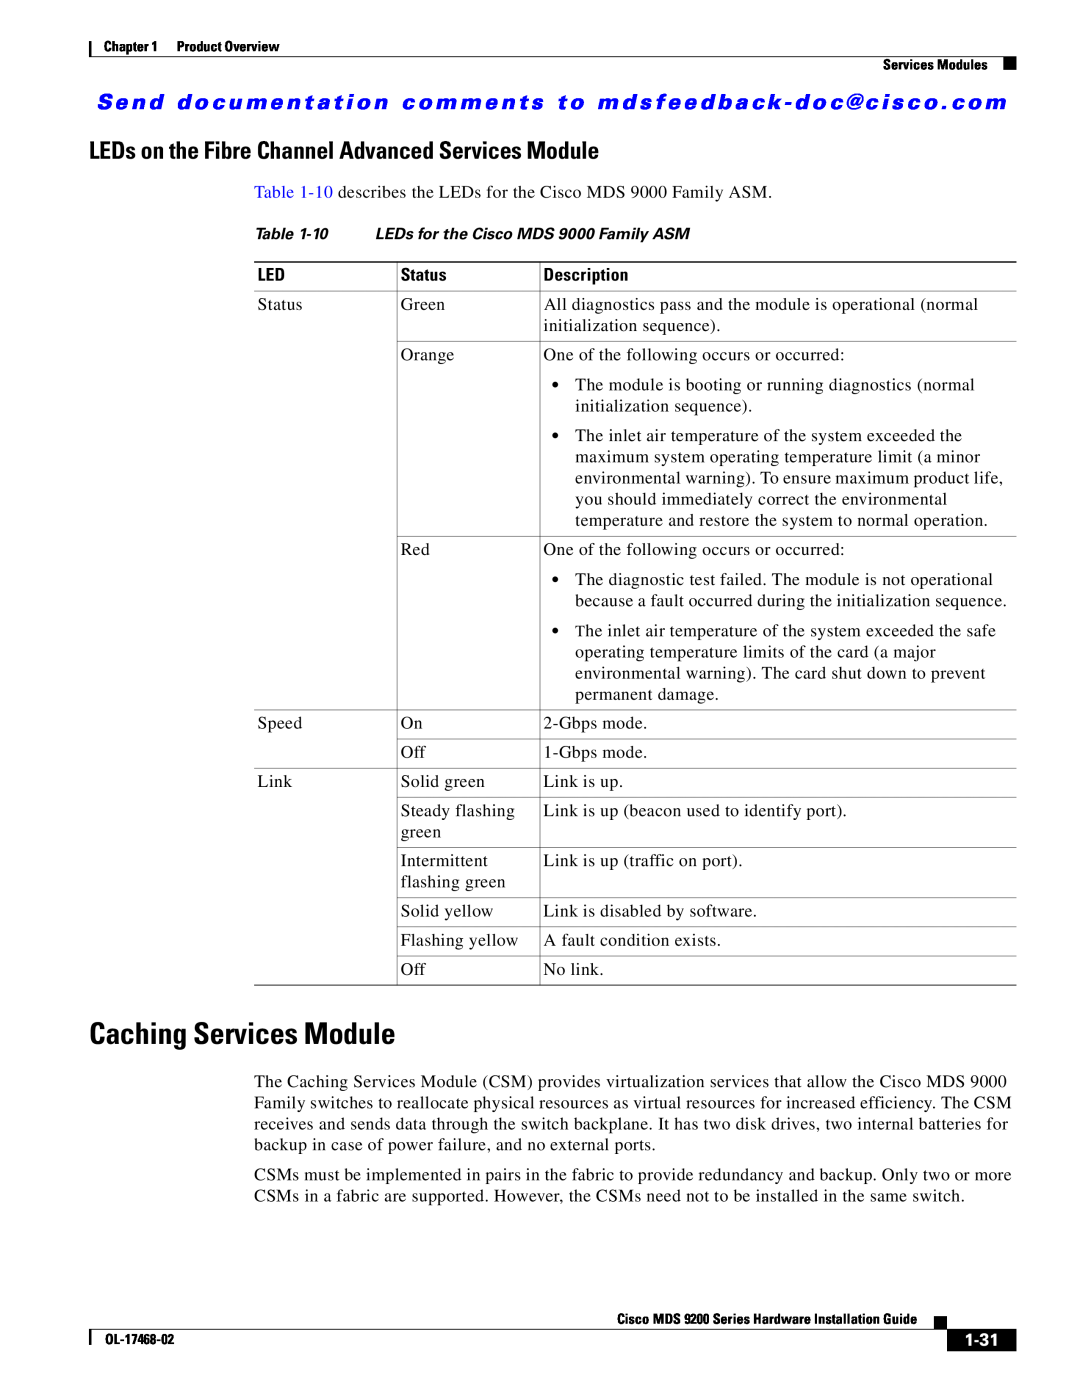 Cisco Systems MDS 9200 Series manual Caching Services Module, LEDs on the Fibre Channel Advanced Services Module, 1-31 